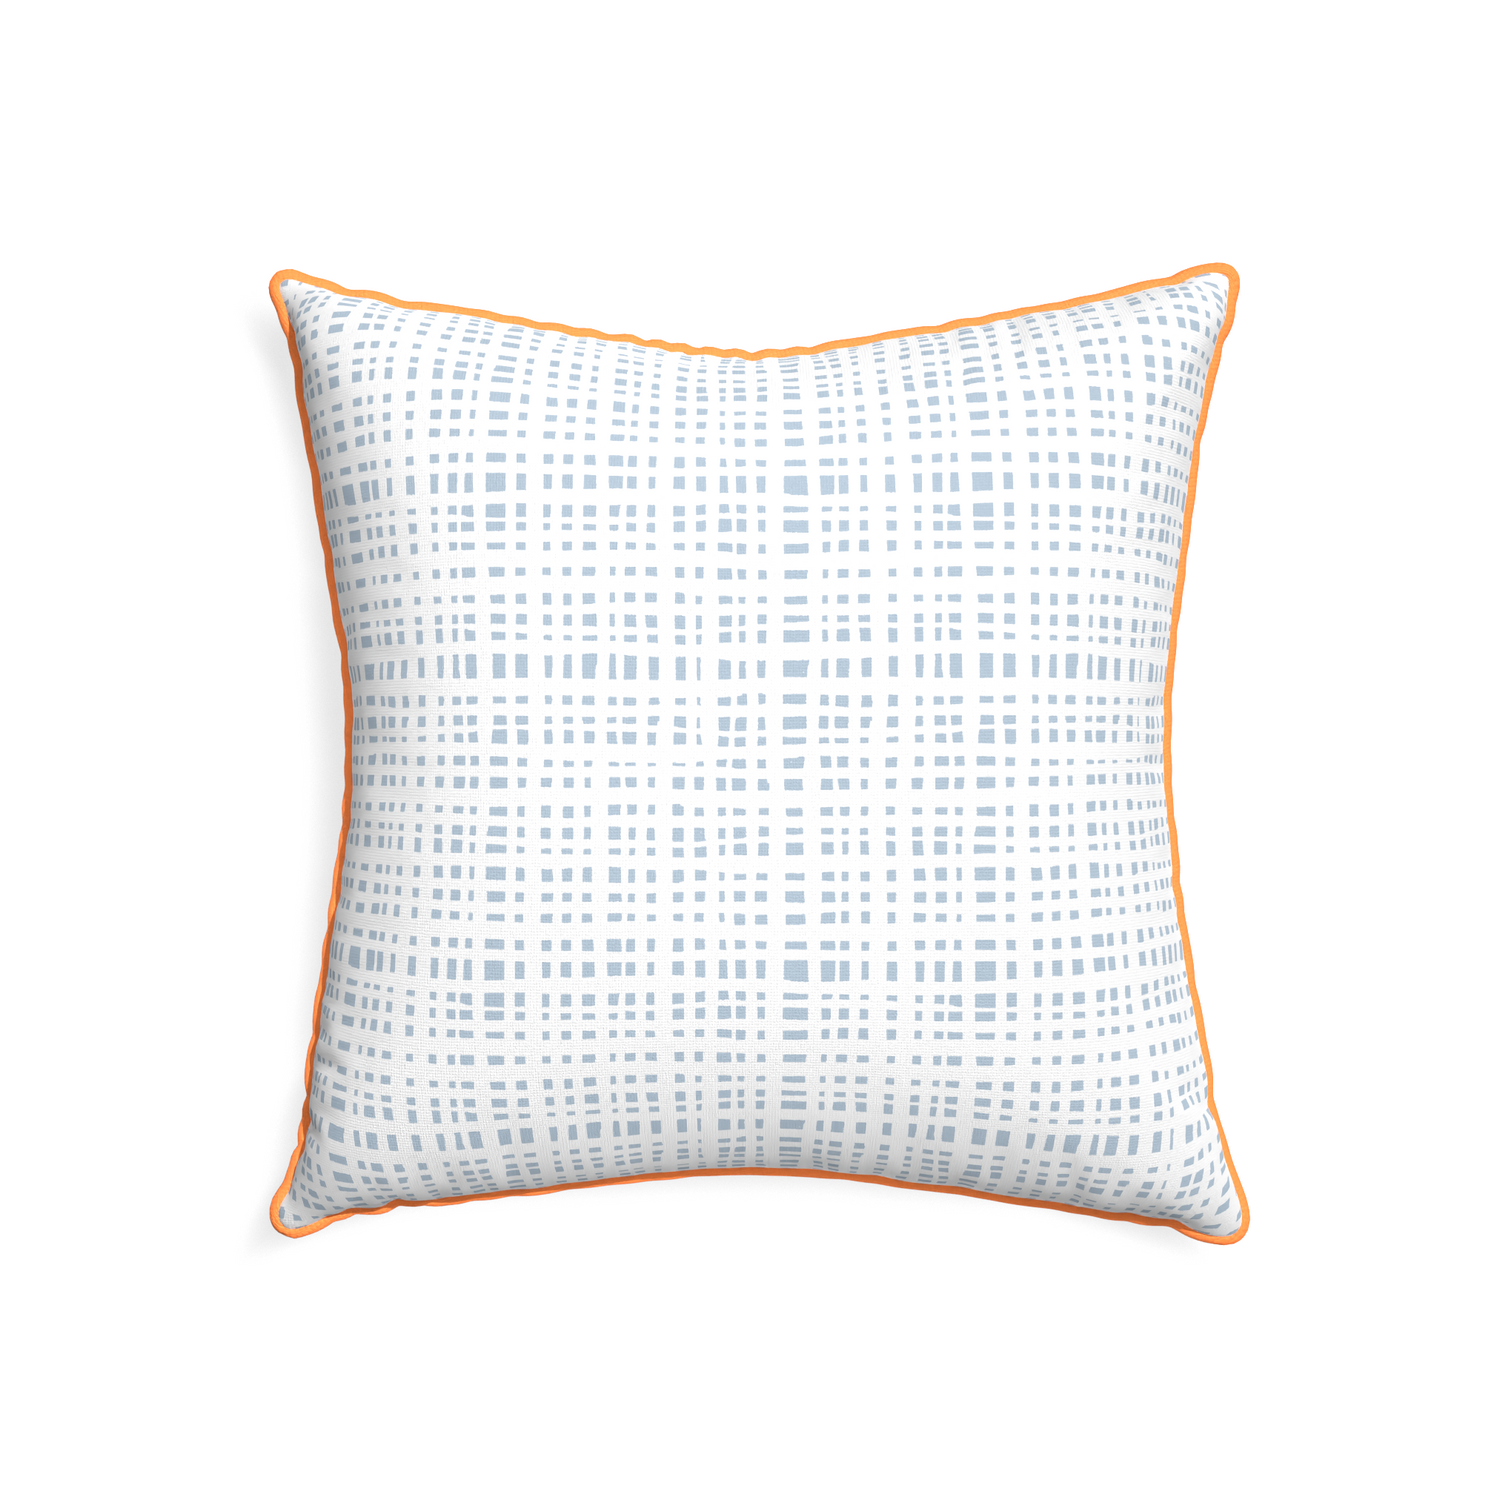 22-square ginger sky custom plaid sky bluepillow with clementine piping on white background